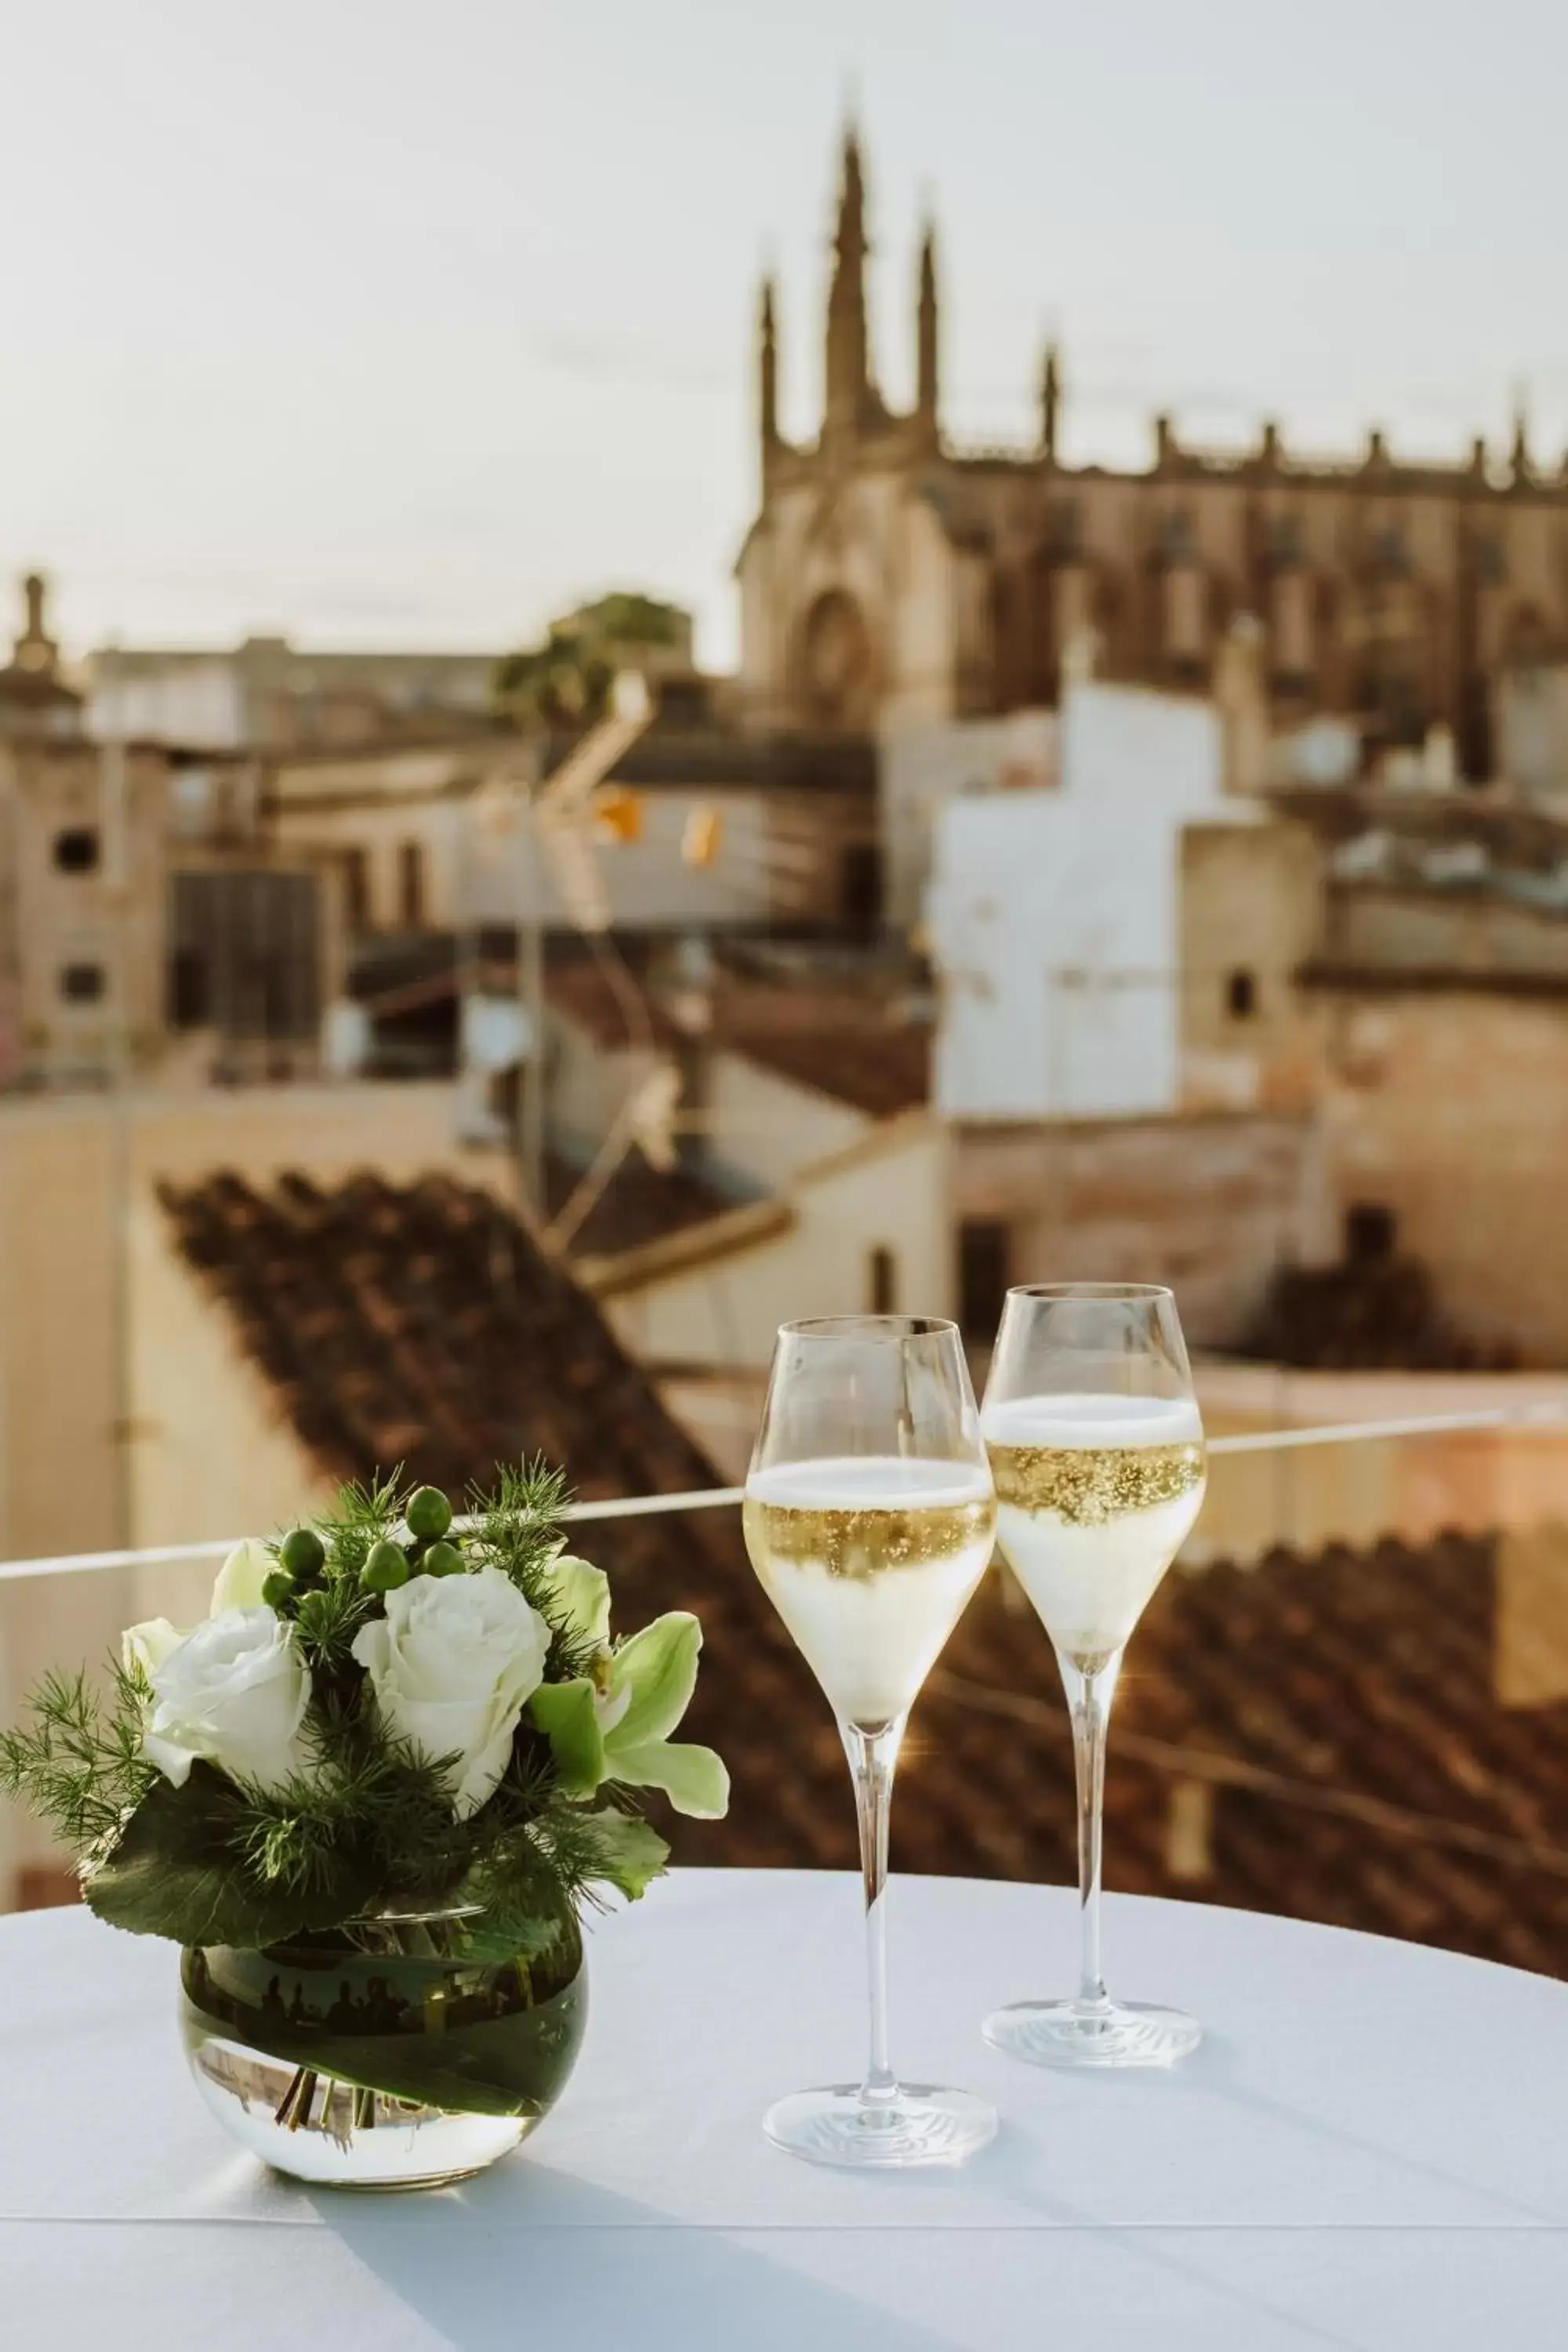 Drinks in Es Princep - The Leading Hotels of the World